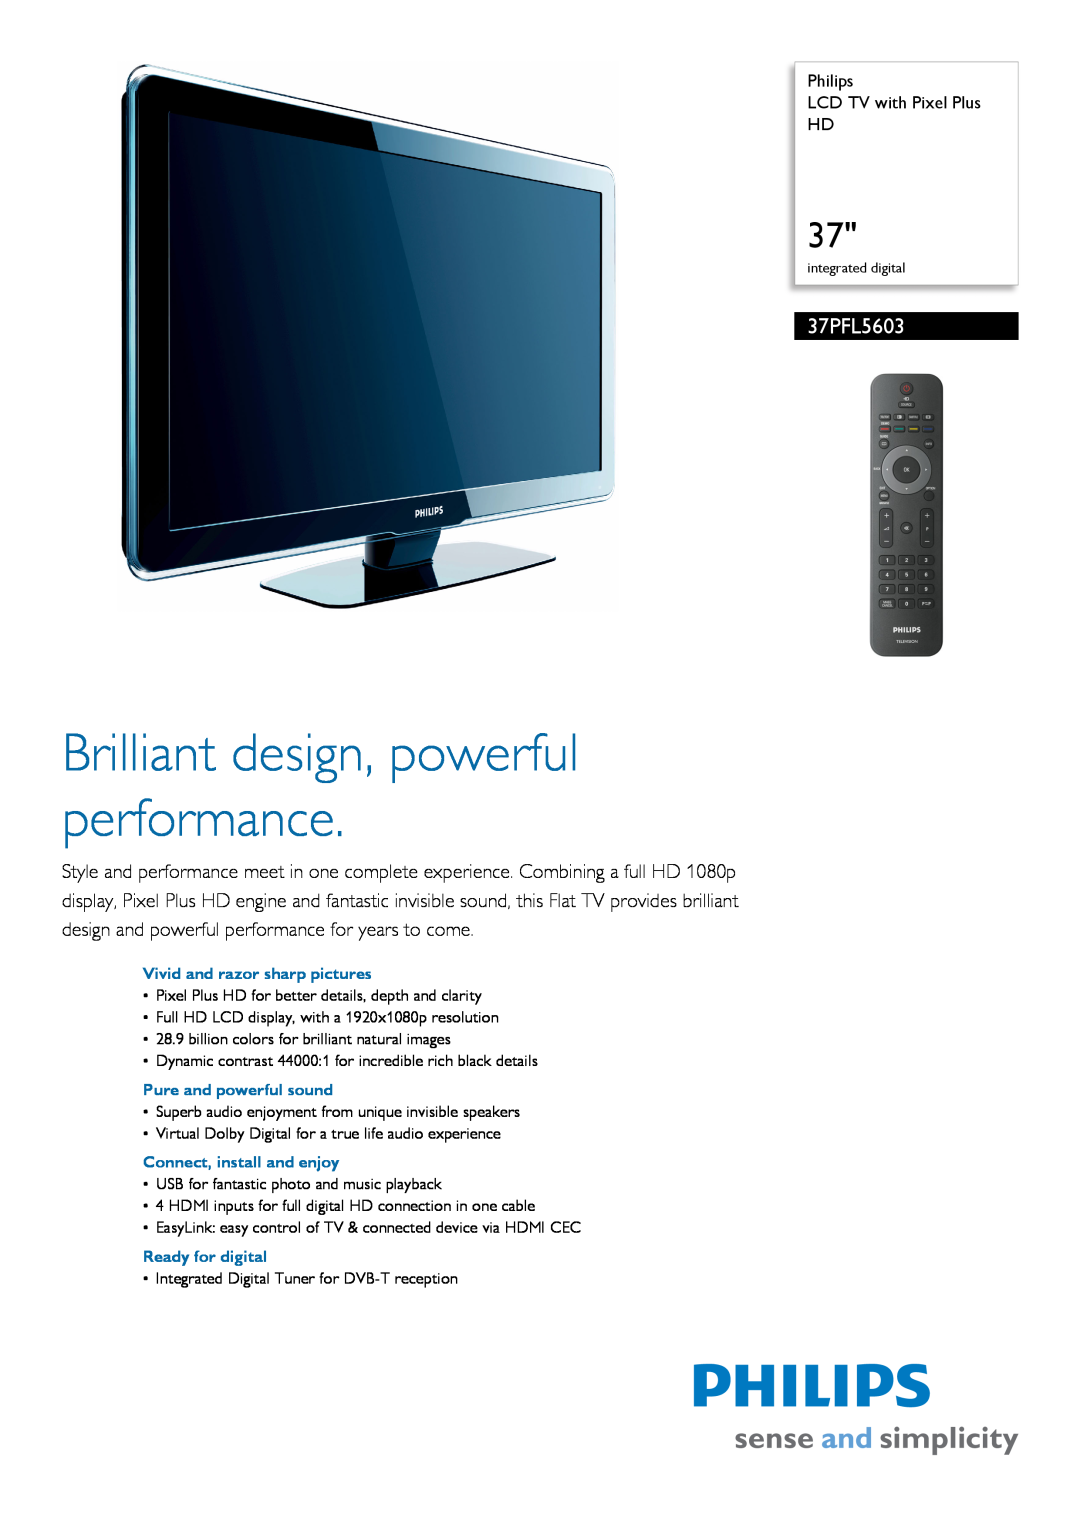 Philips 37PFL5603/60 manual Philips LCD TV with Pixel Plus HD, Brilliant design, powerful performance 